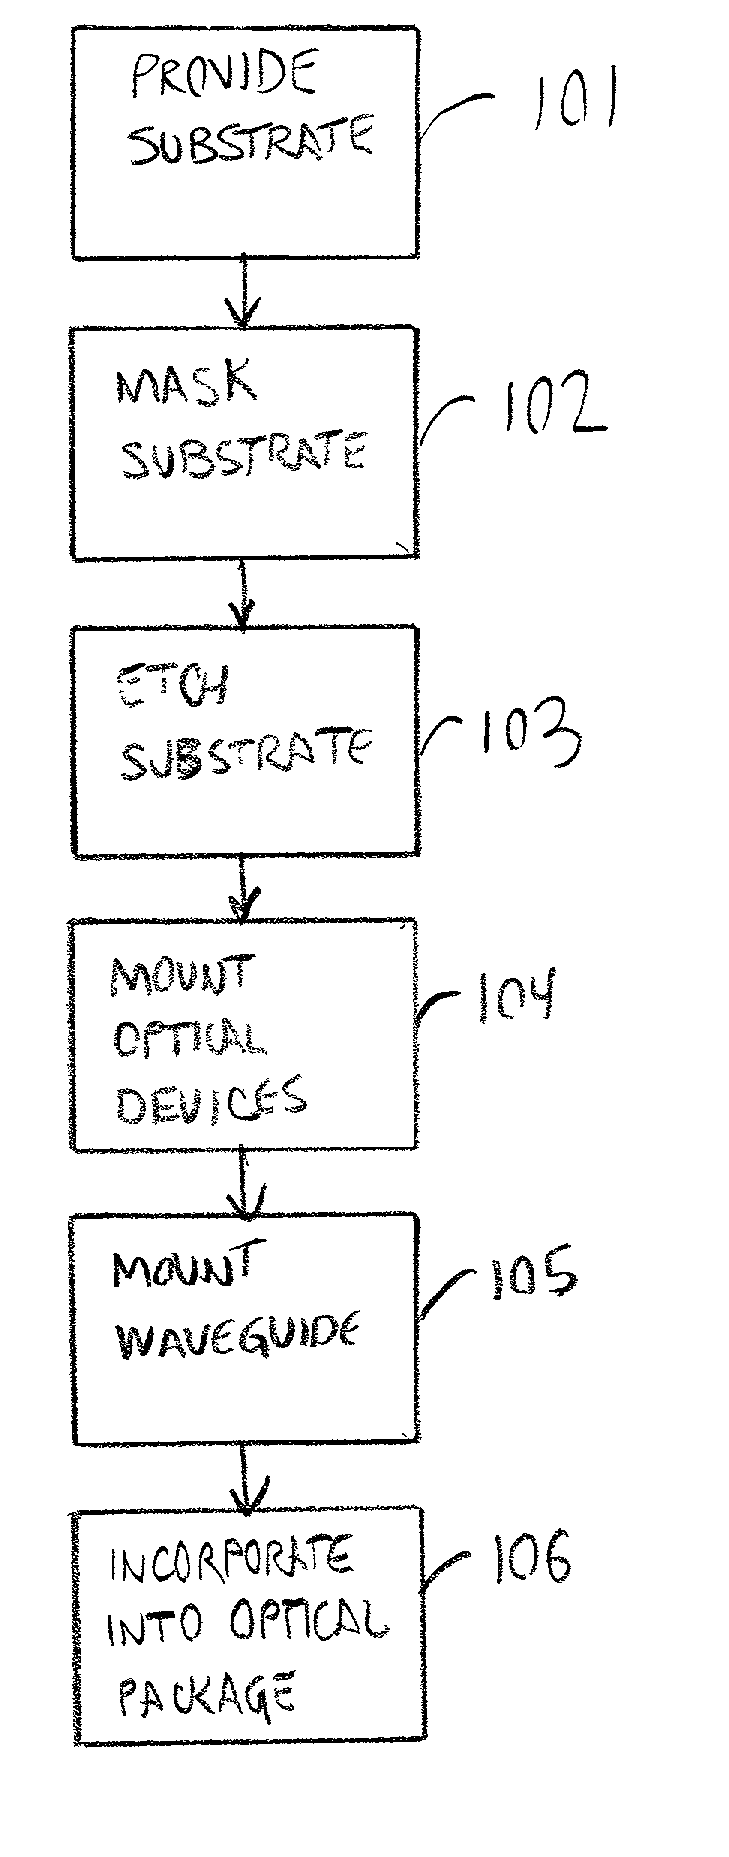 Optical substrate having alignment fiducials